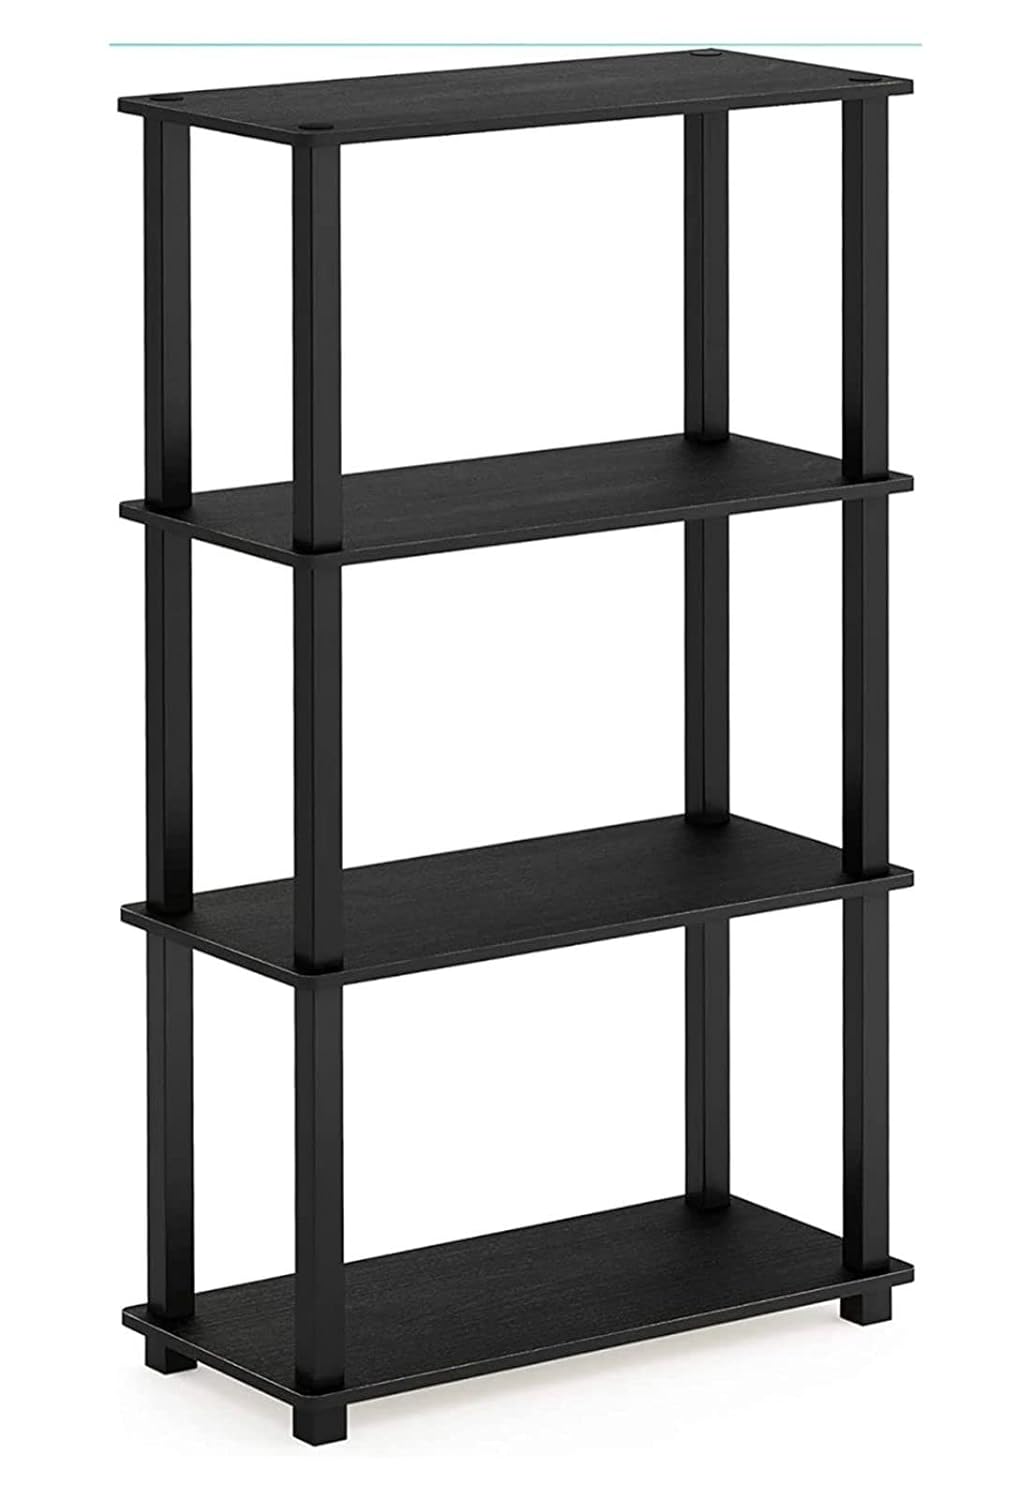 MALBRO Turn N Tube 3 Tier Rack Wall Shelf for Living Bed Room Home Office | Multipurpose Storage Shelves and Display Organizer with Utility Storage for Home Décor_(Color - Venge)